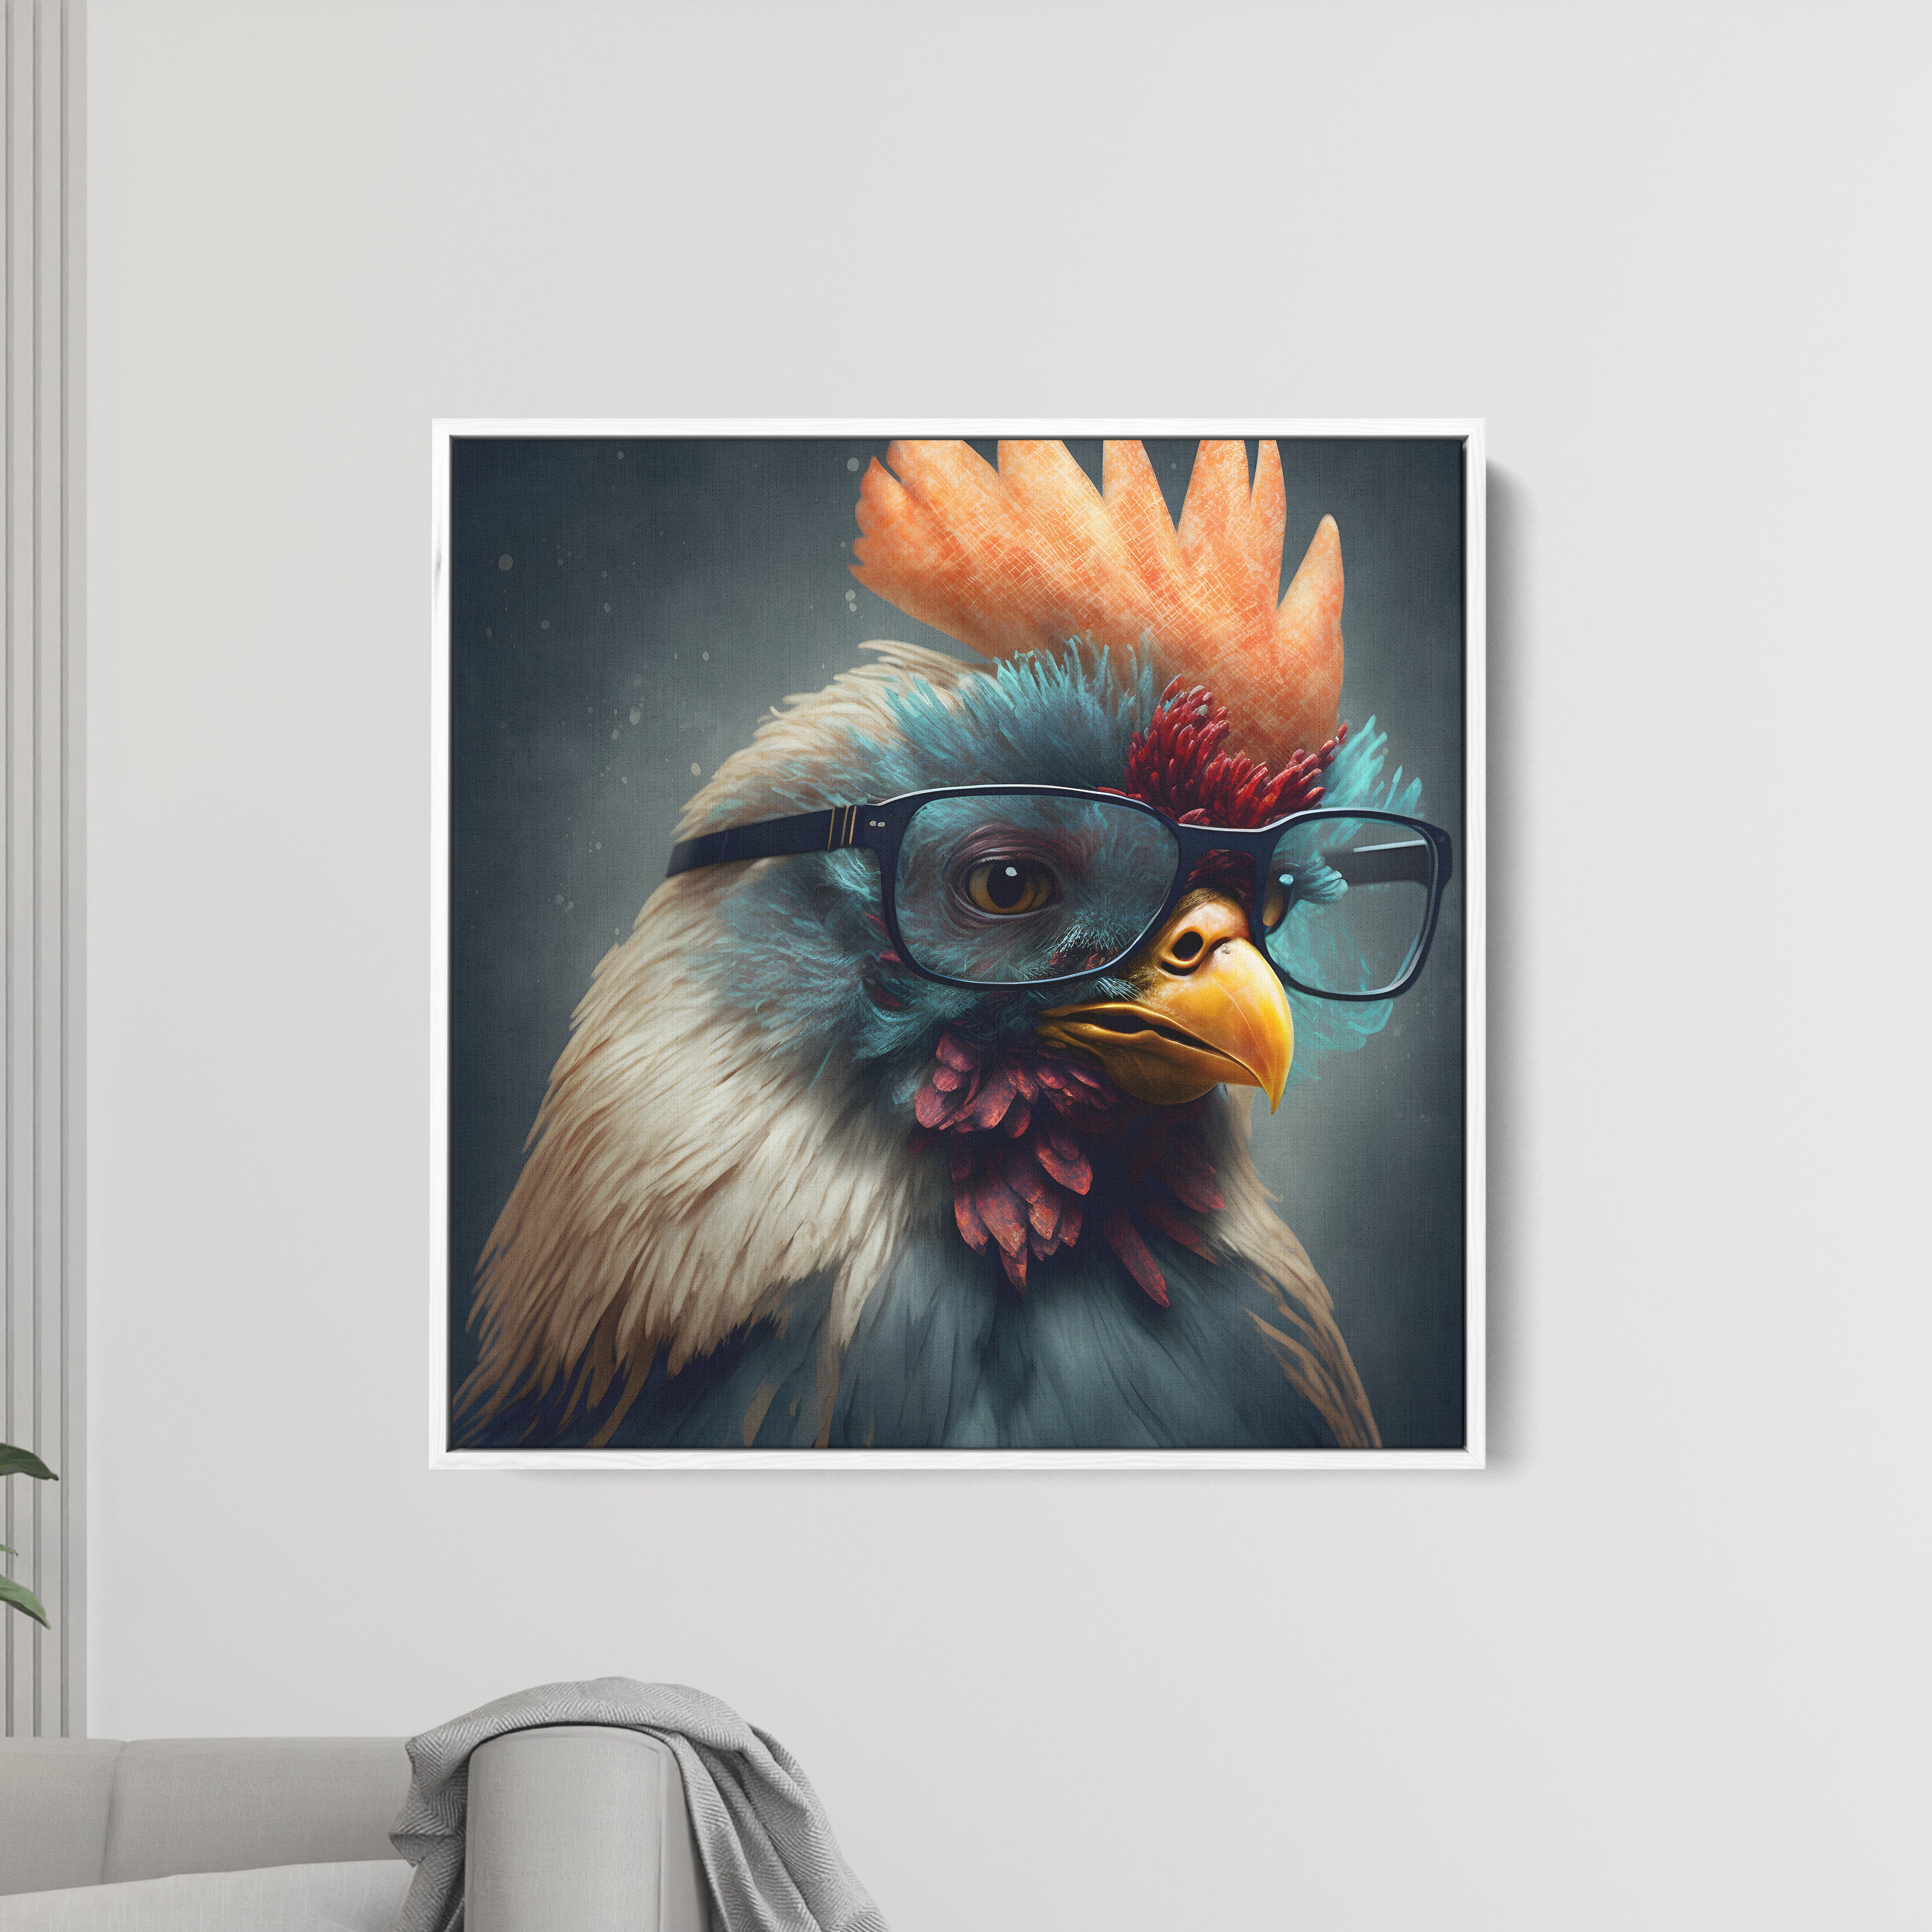 Chicken Wearing Goggles Canvas Wall Painting